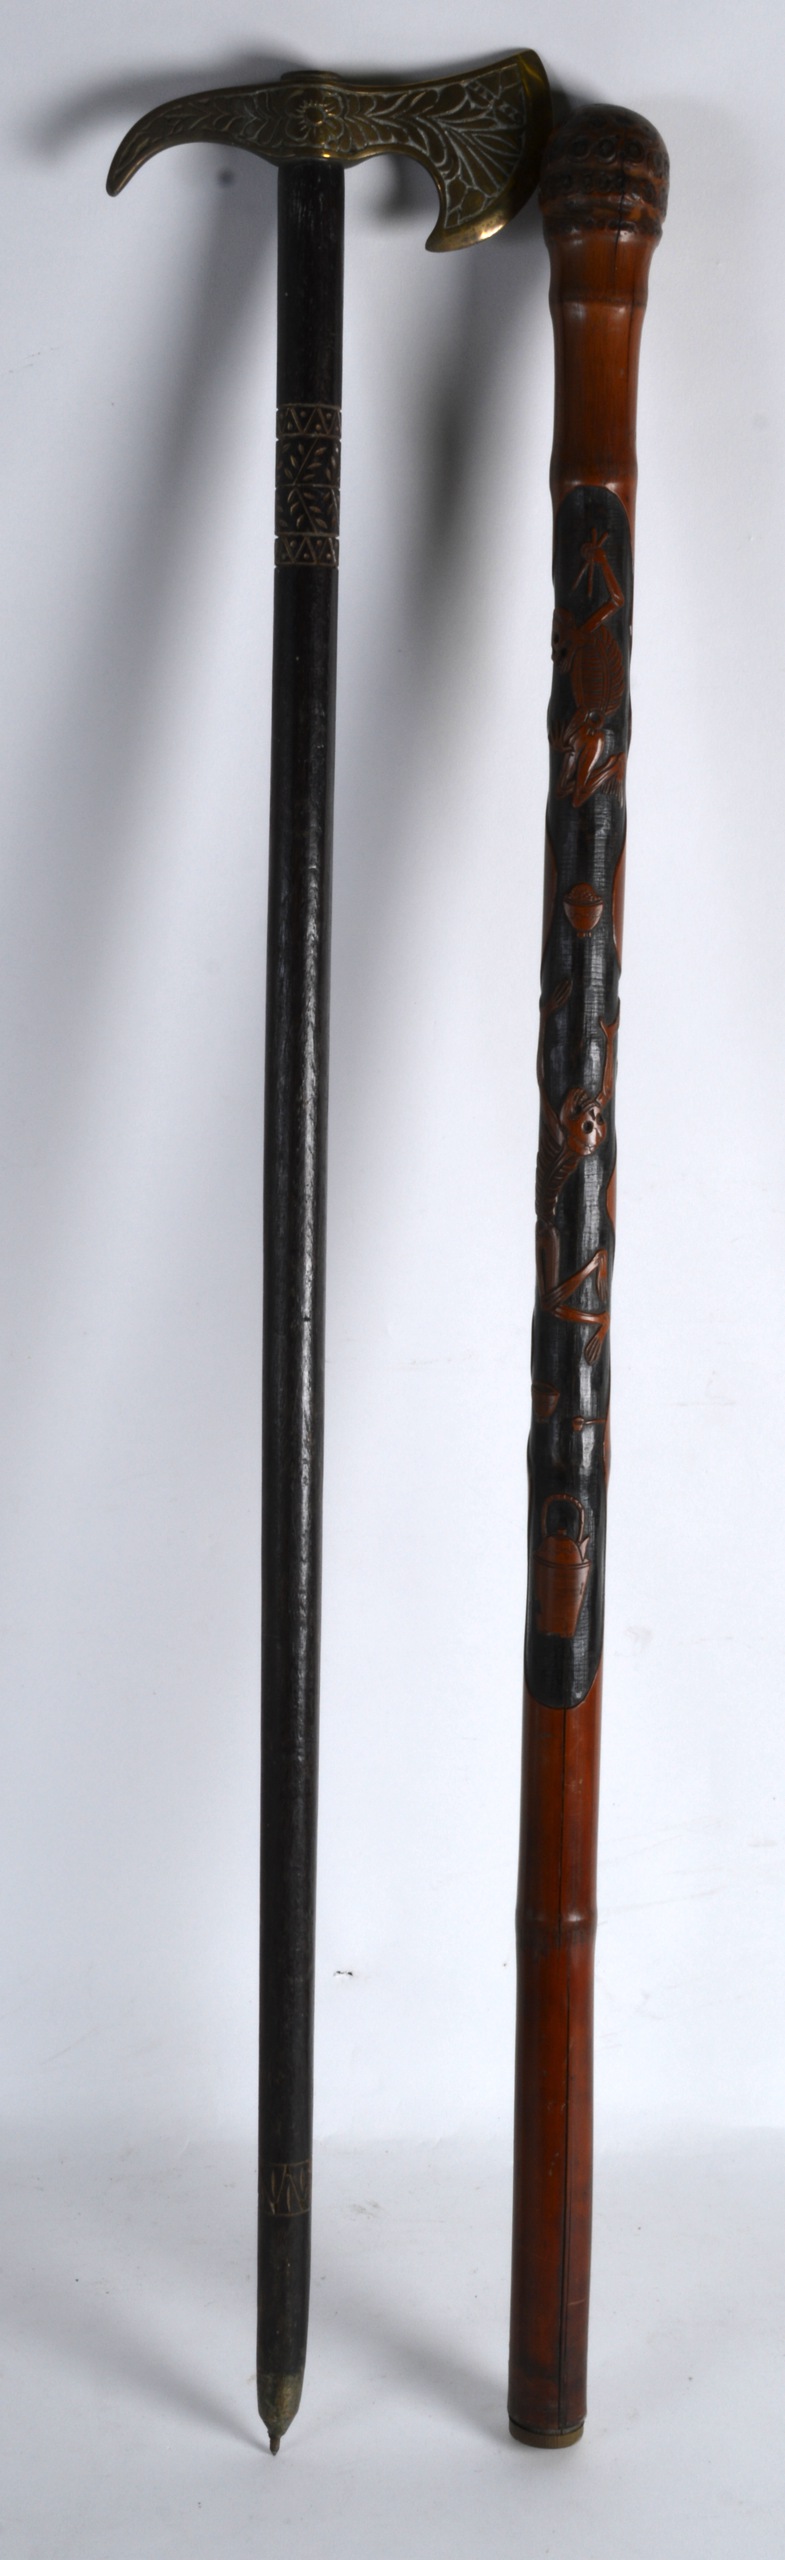 AN EARLY 20TH CENTURY JAPANESE MEIJI PERIOD BAMBOO GENTLEMANS CANE carved with hungry skeletons